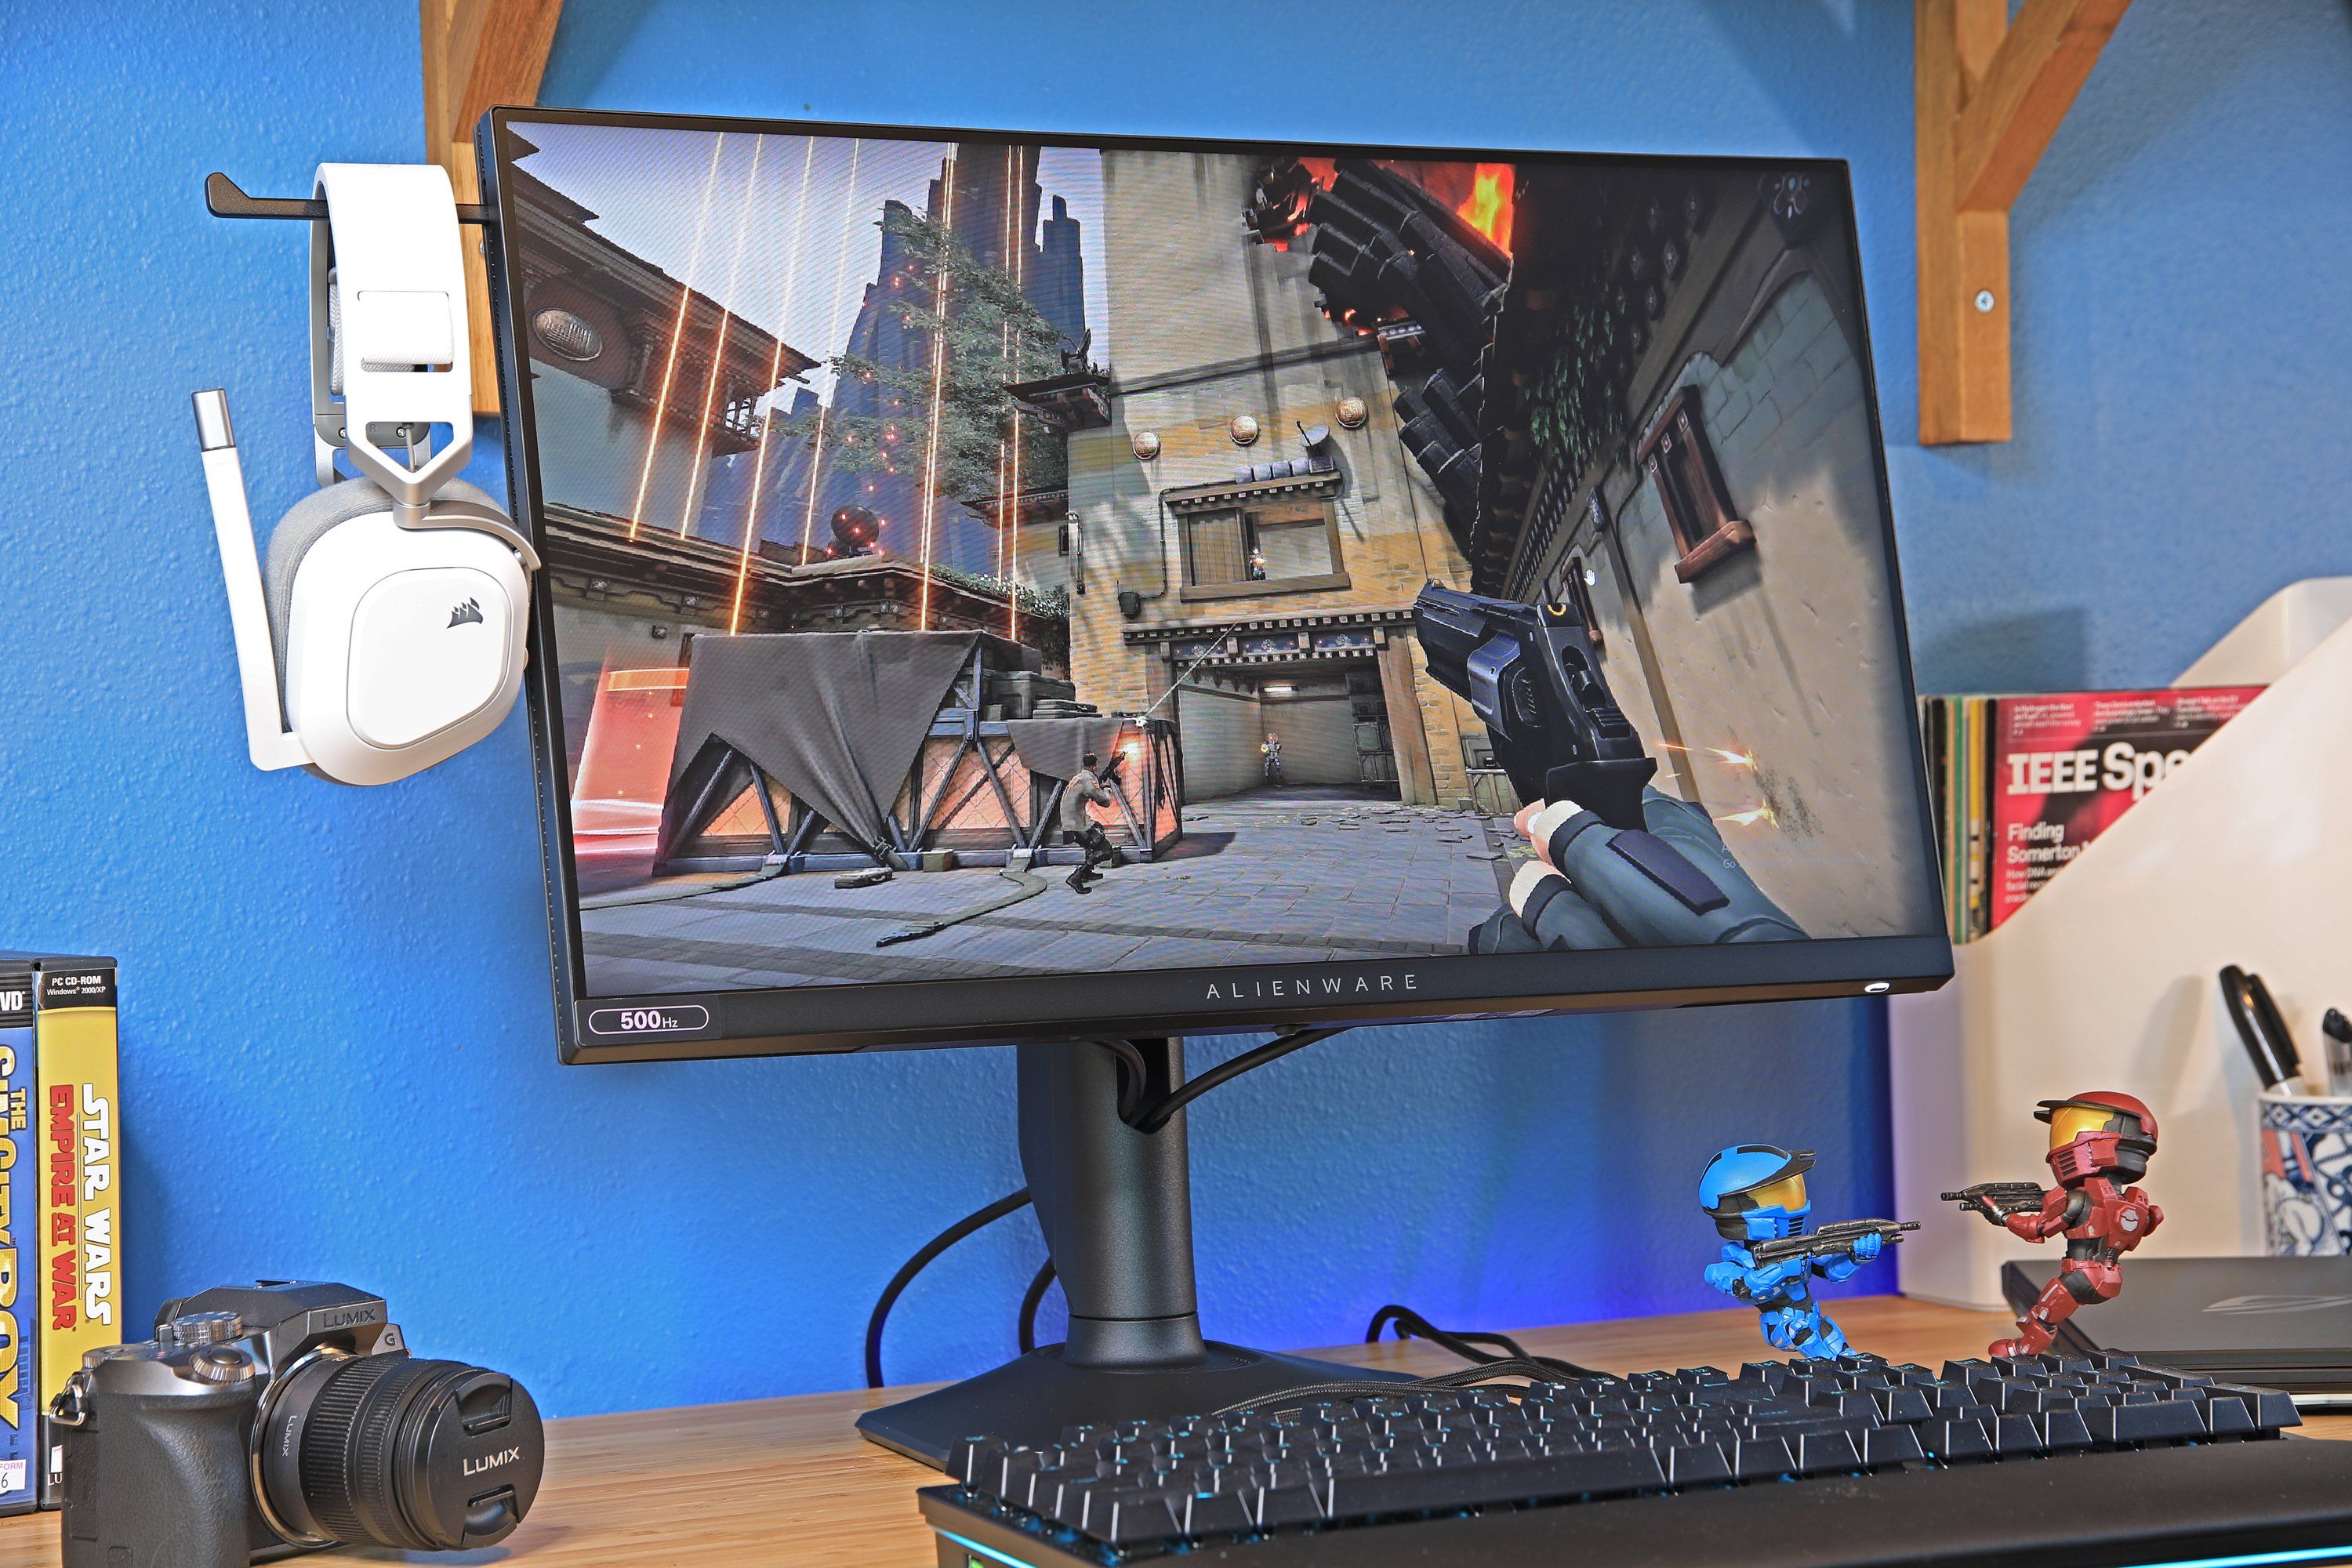 A 500Hz Alienware computer monitor on a desk. A video game is playing on the monitor.